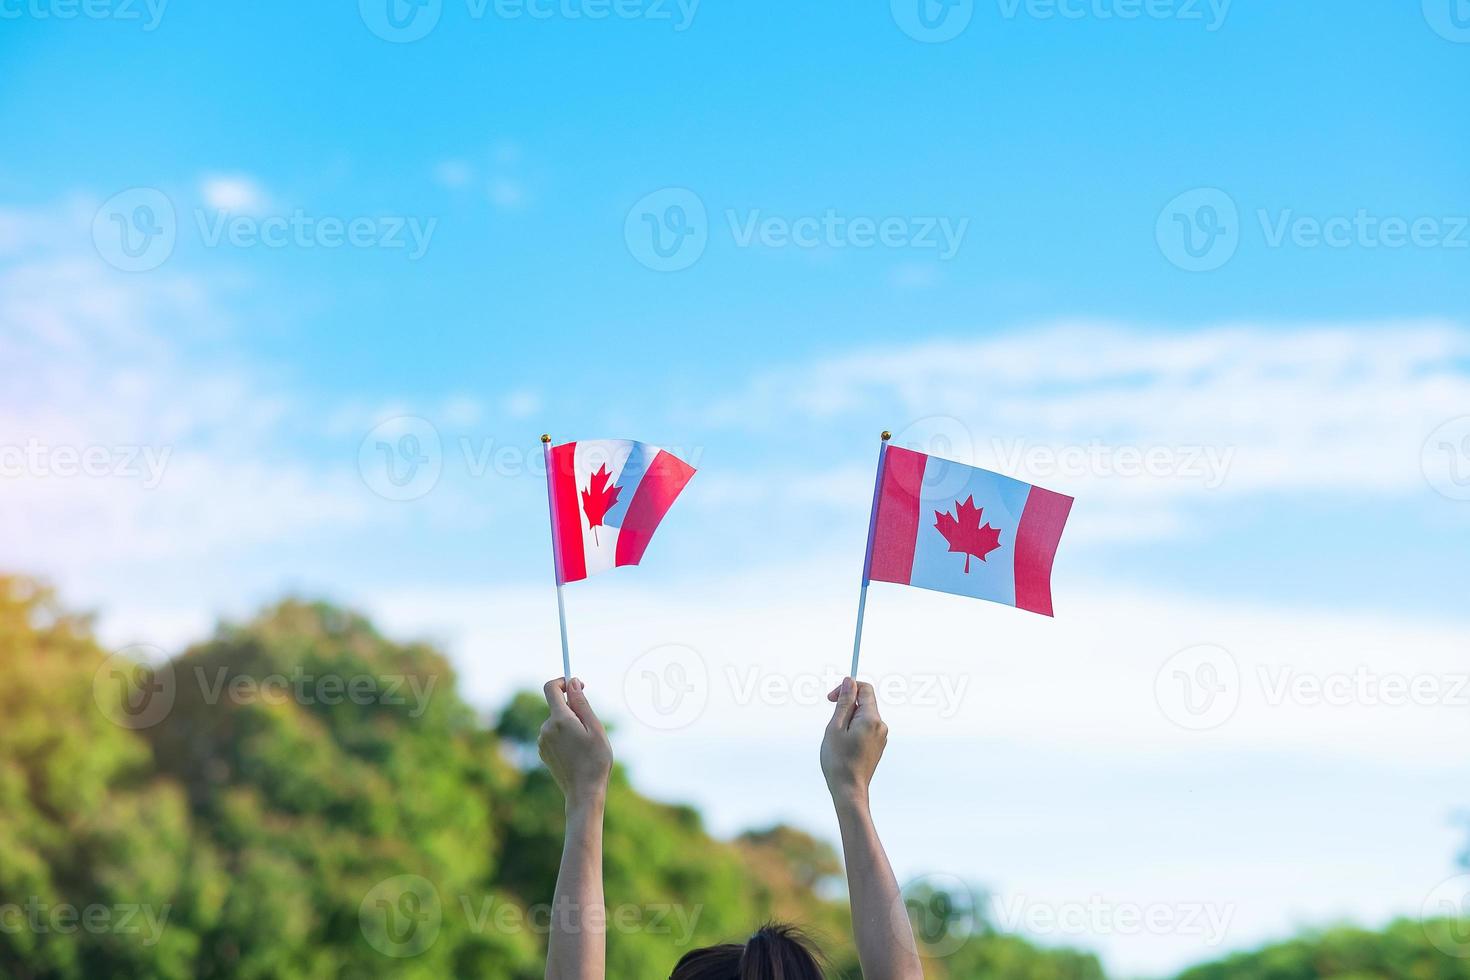 hand holding Canada flag on blue sky background. Canada Day  and happy celebration concepts photo